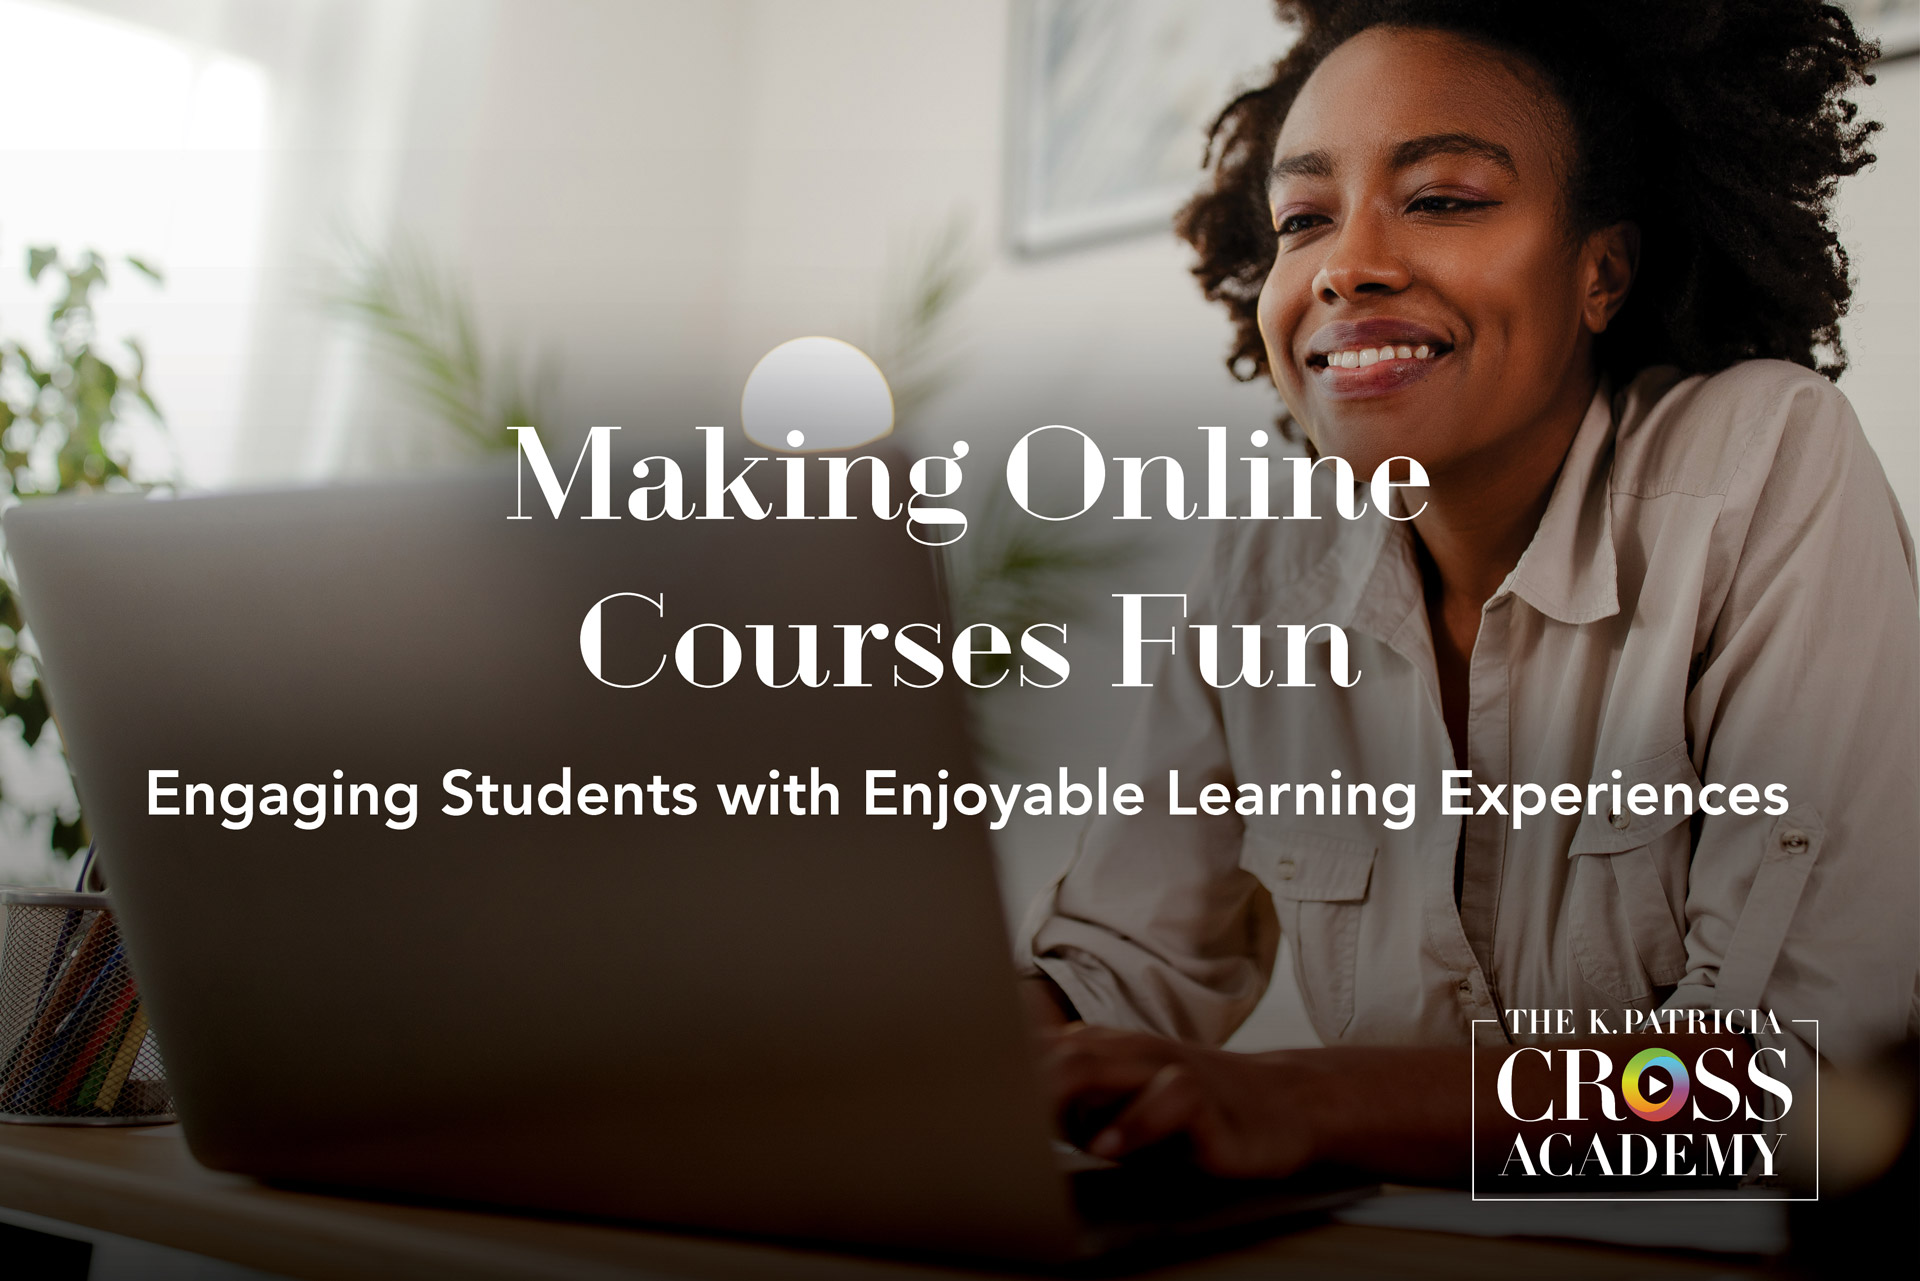 Featured image for “Making Online Courses Fun: Engaging Students with Enjoyable Learning Experiences”